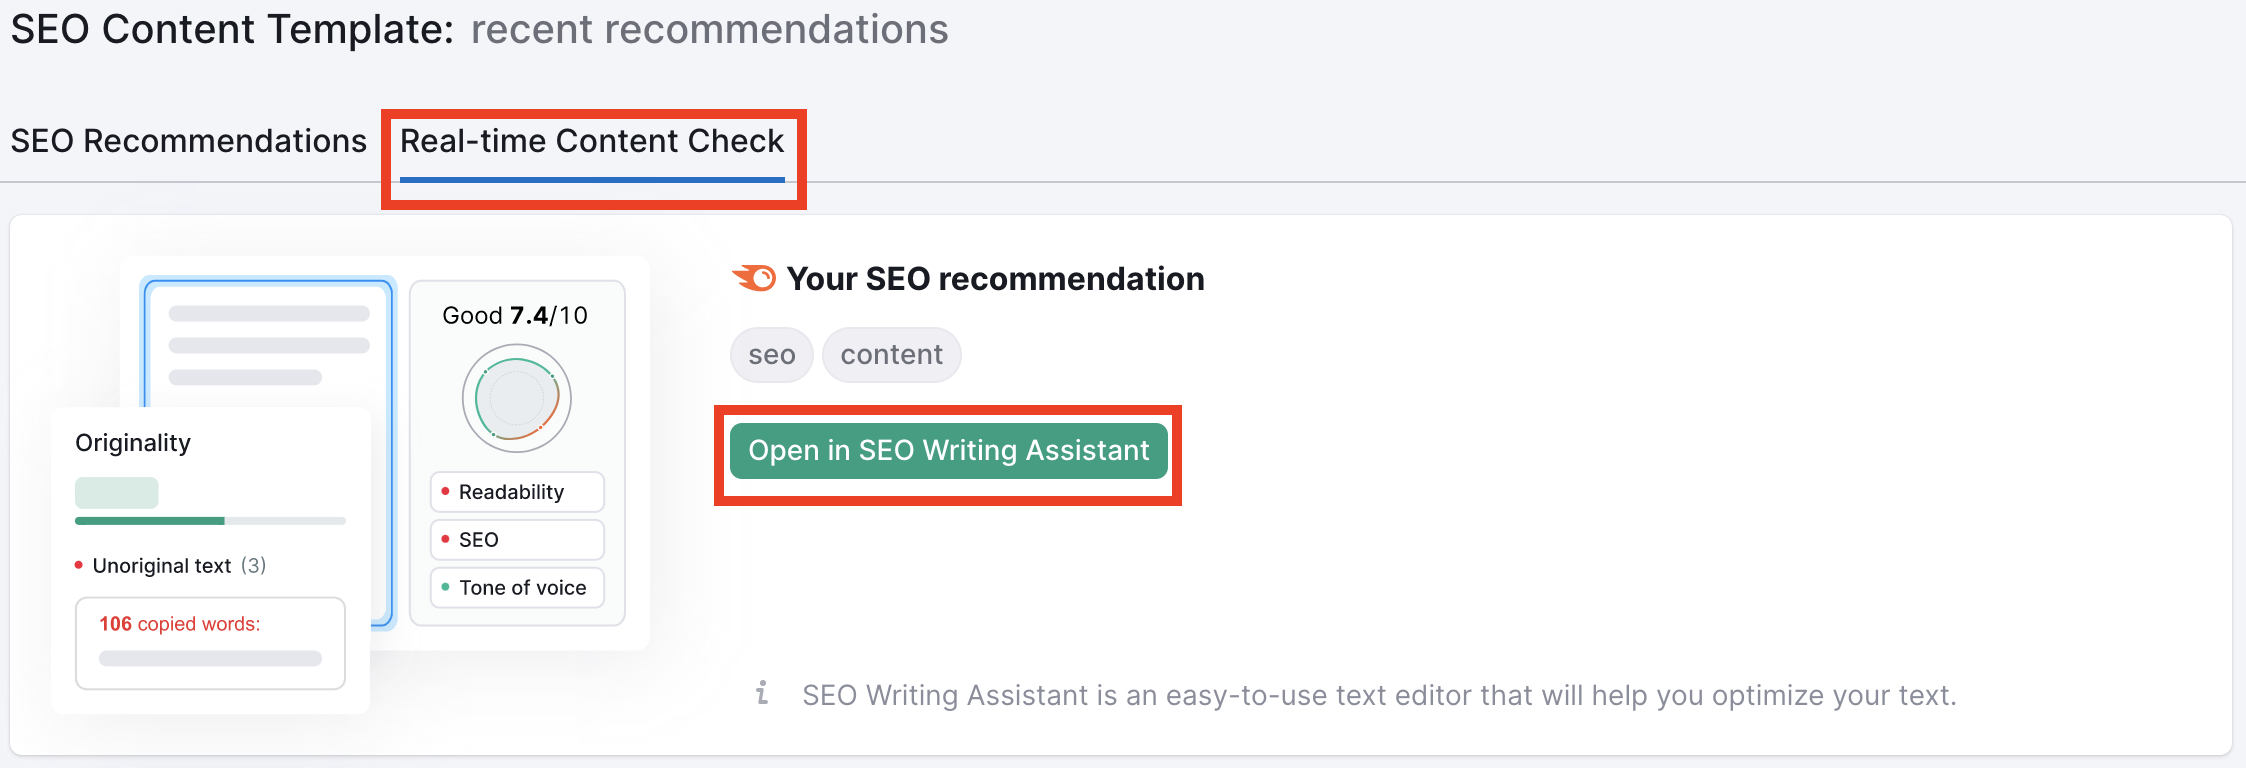 A red rectangle highlights the 'real-time content check' tab and another red rectangle highlights the 'open in SEO Writing Assistant' button. 